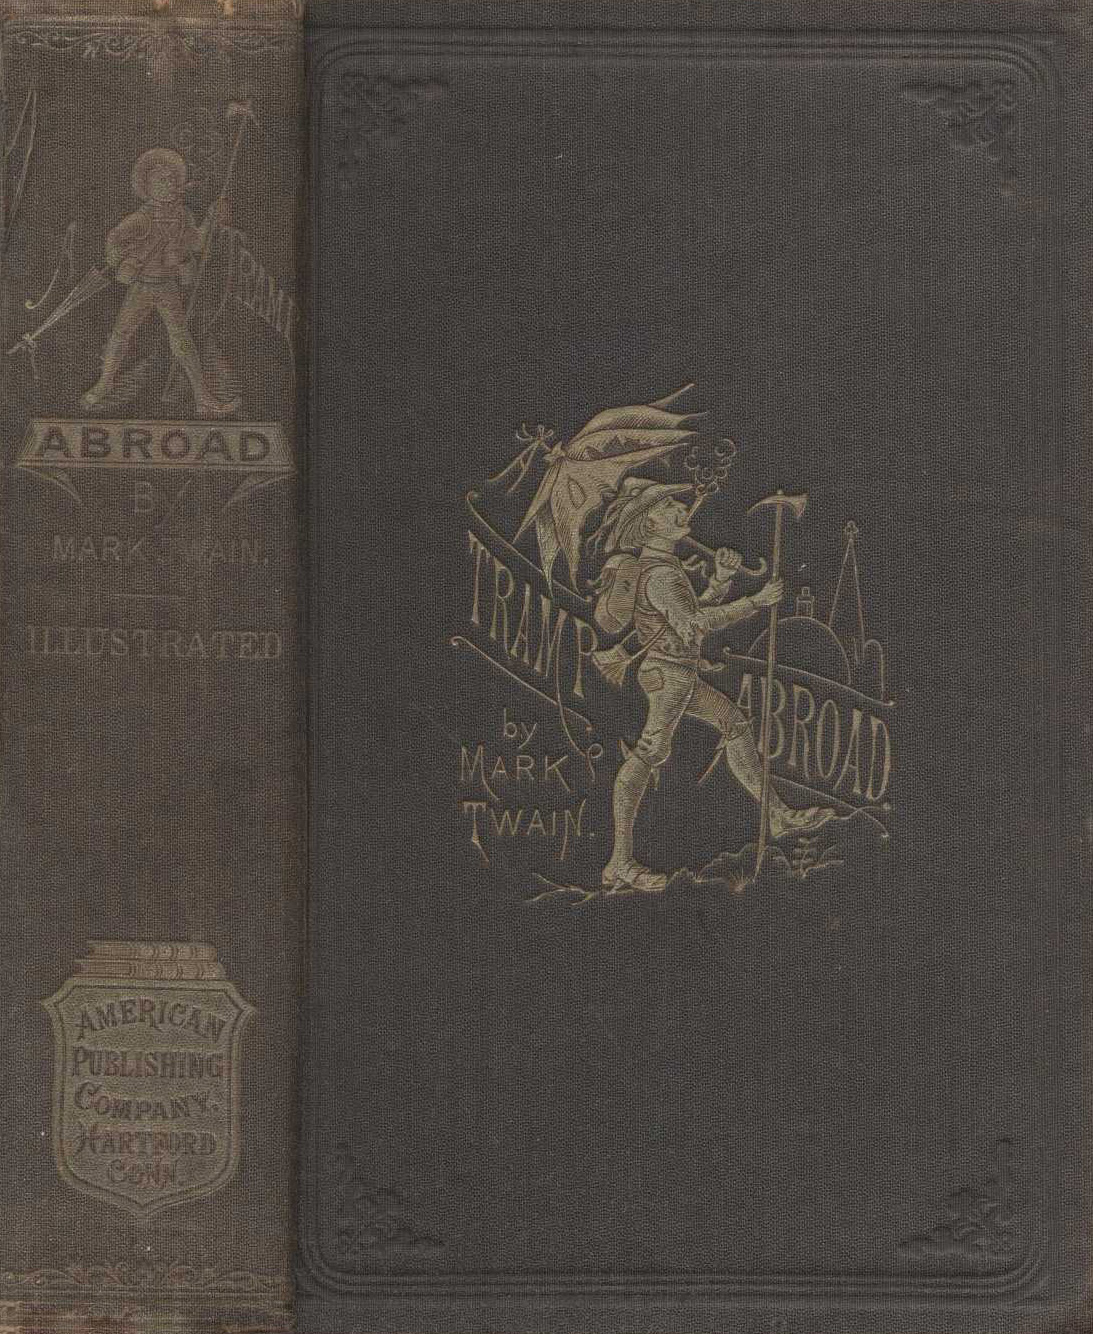 The Project Gutenberg eBook of A Tramp Abroad, by Mark Twain